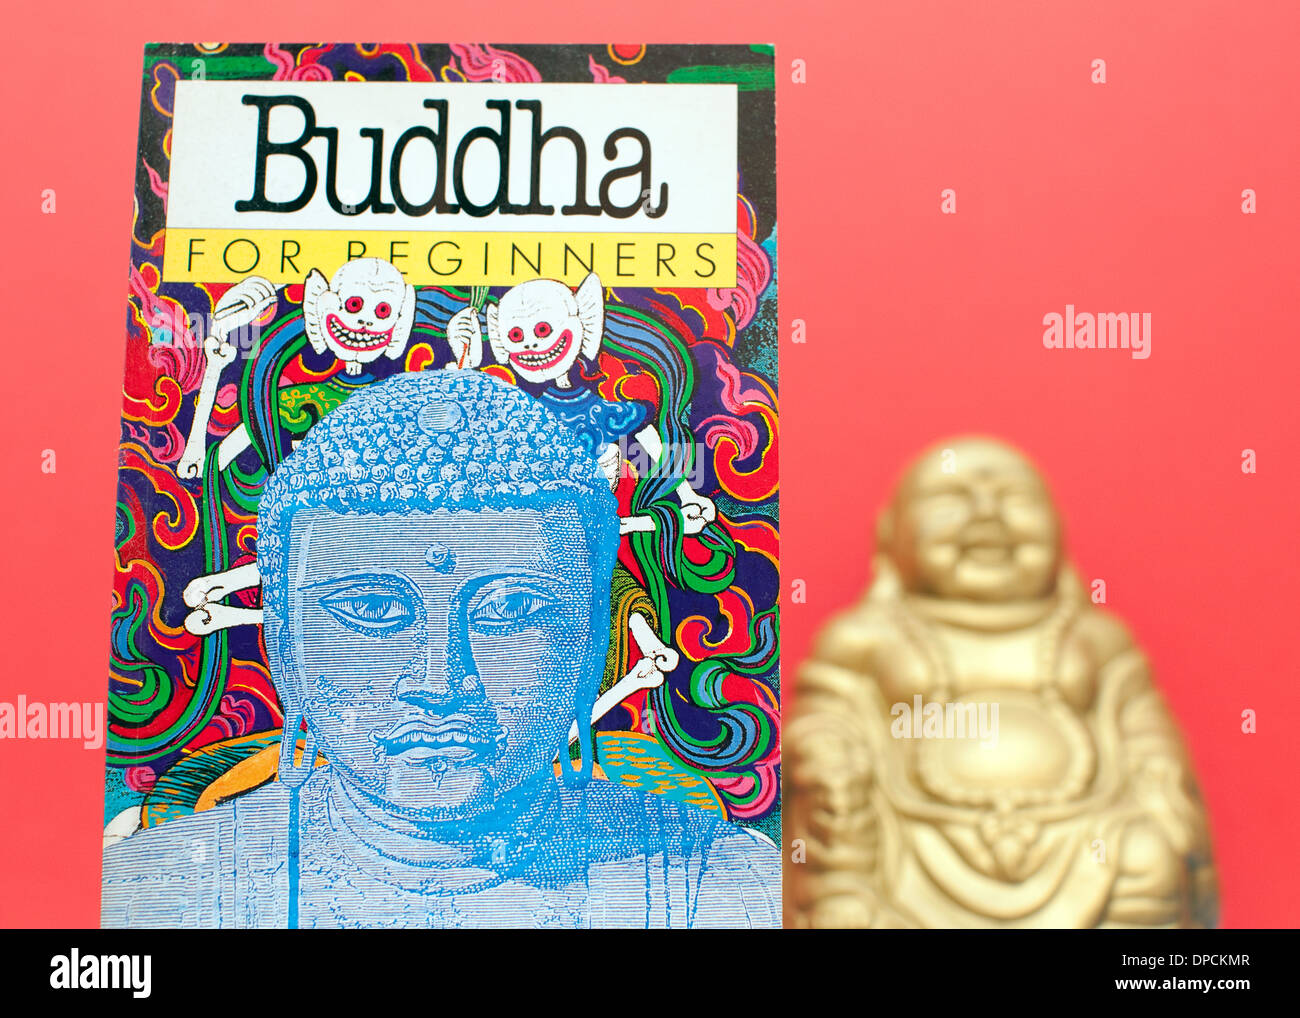 Buddha for Beginners book with gold Buddha figure Stock Photo